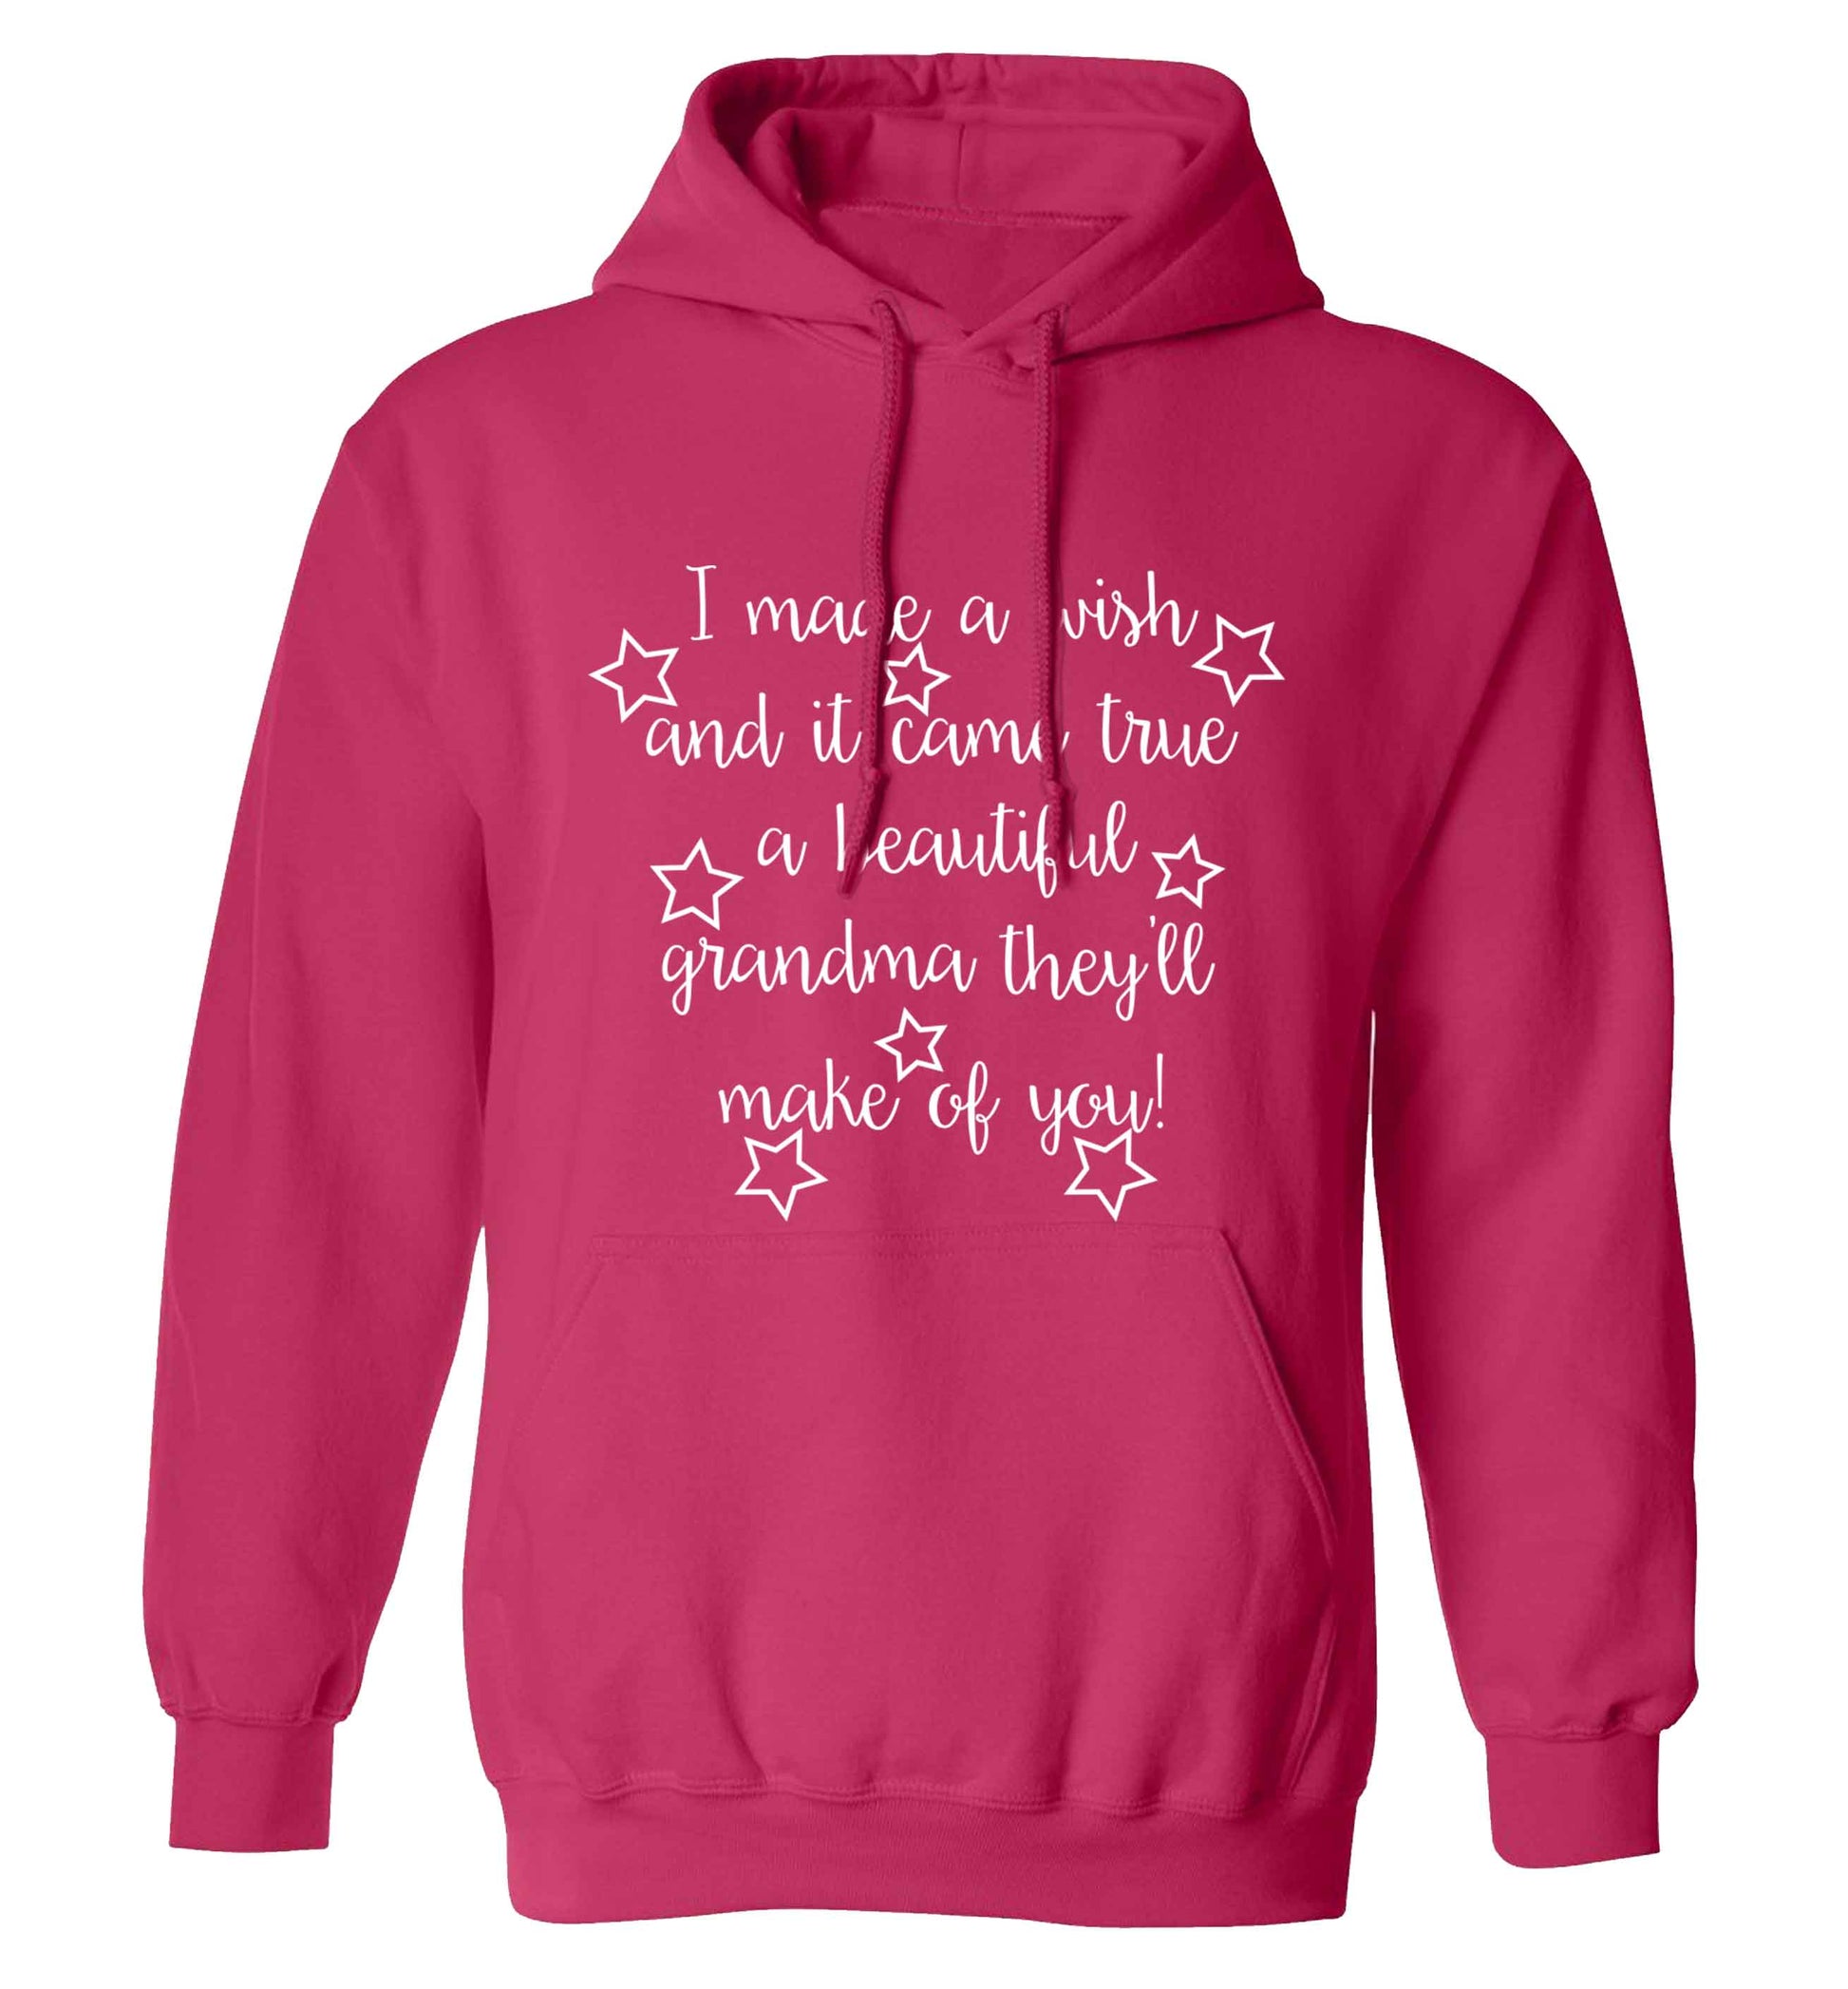 I made a wish and it came true a beautiful grandma they'll make of you! adults unisex pink hoodie 2XL